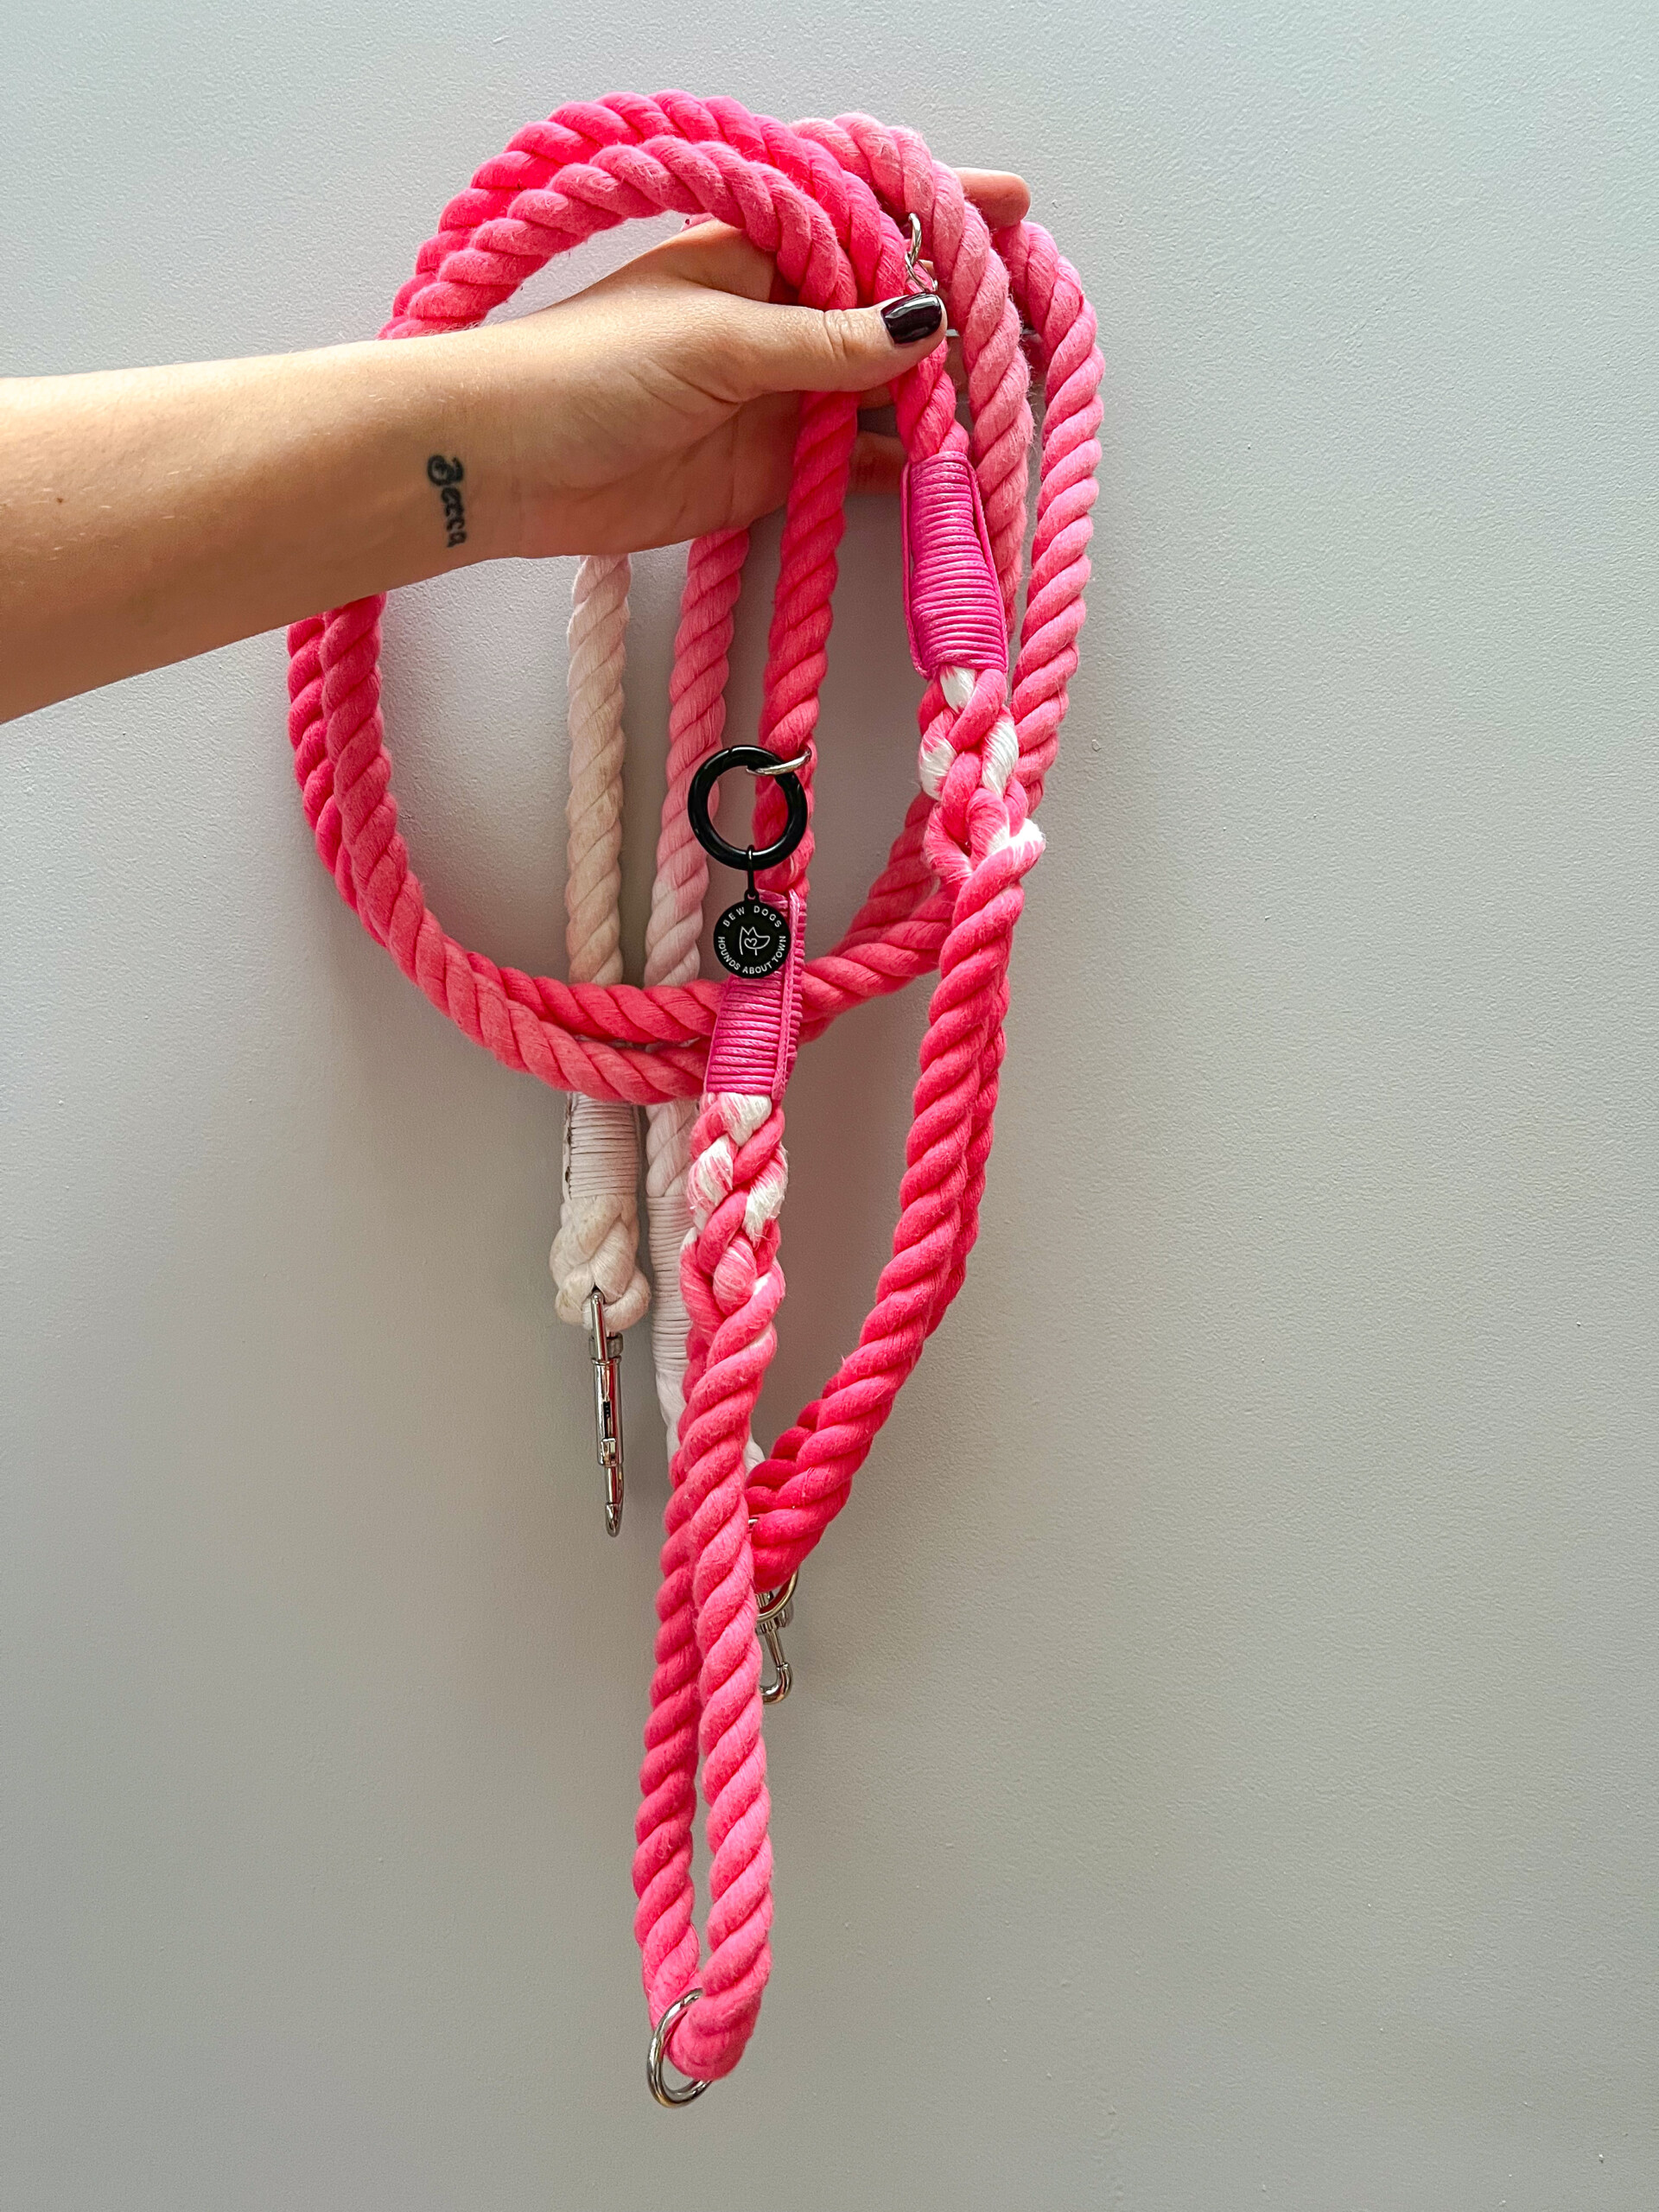 A pink ombre luxury rope lead, being held by a woman with deep and dark red painted nails against a grey painted wall